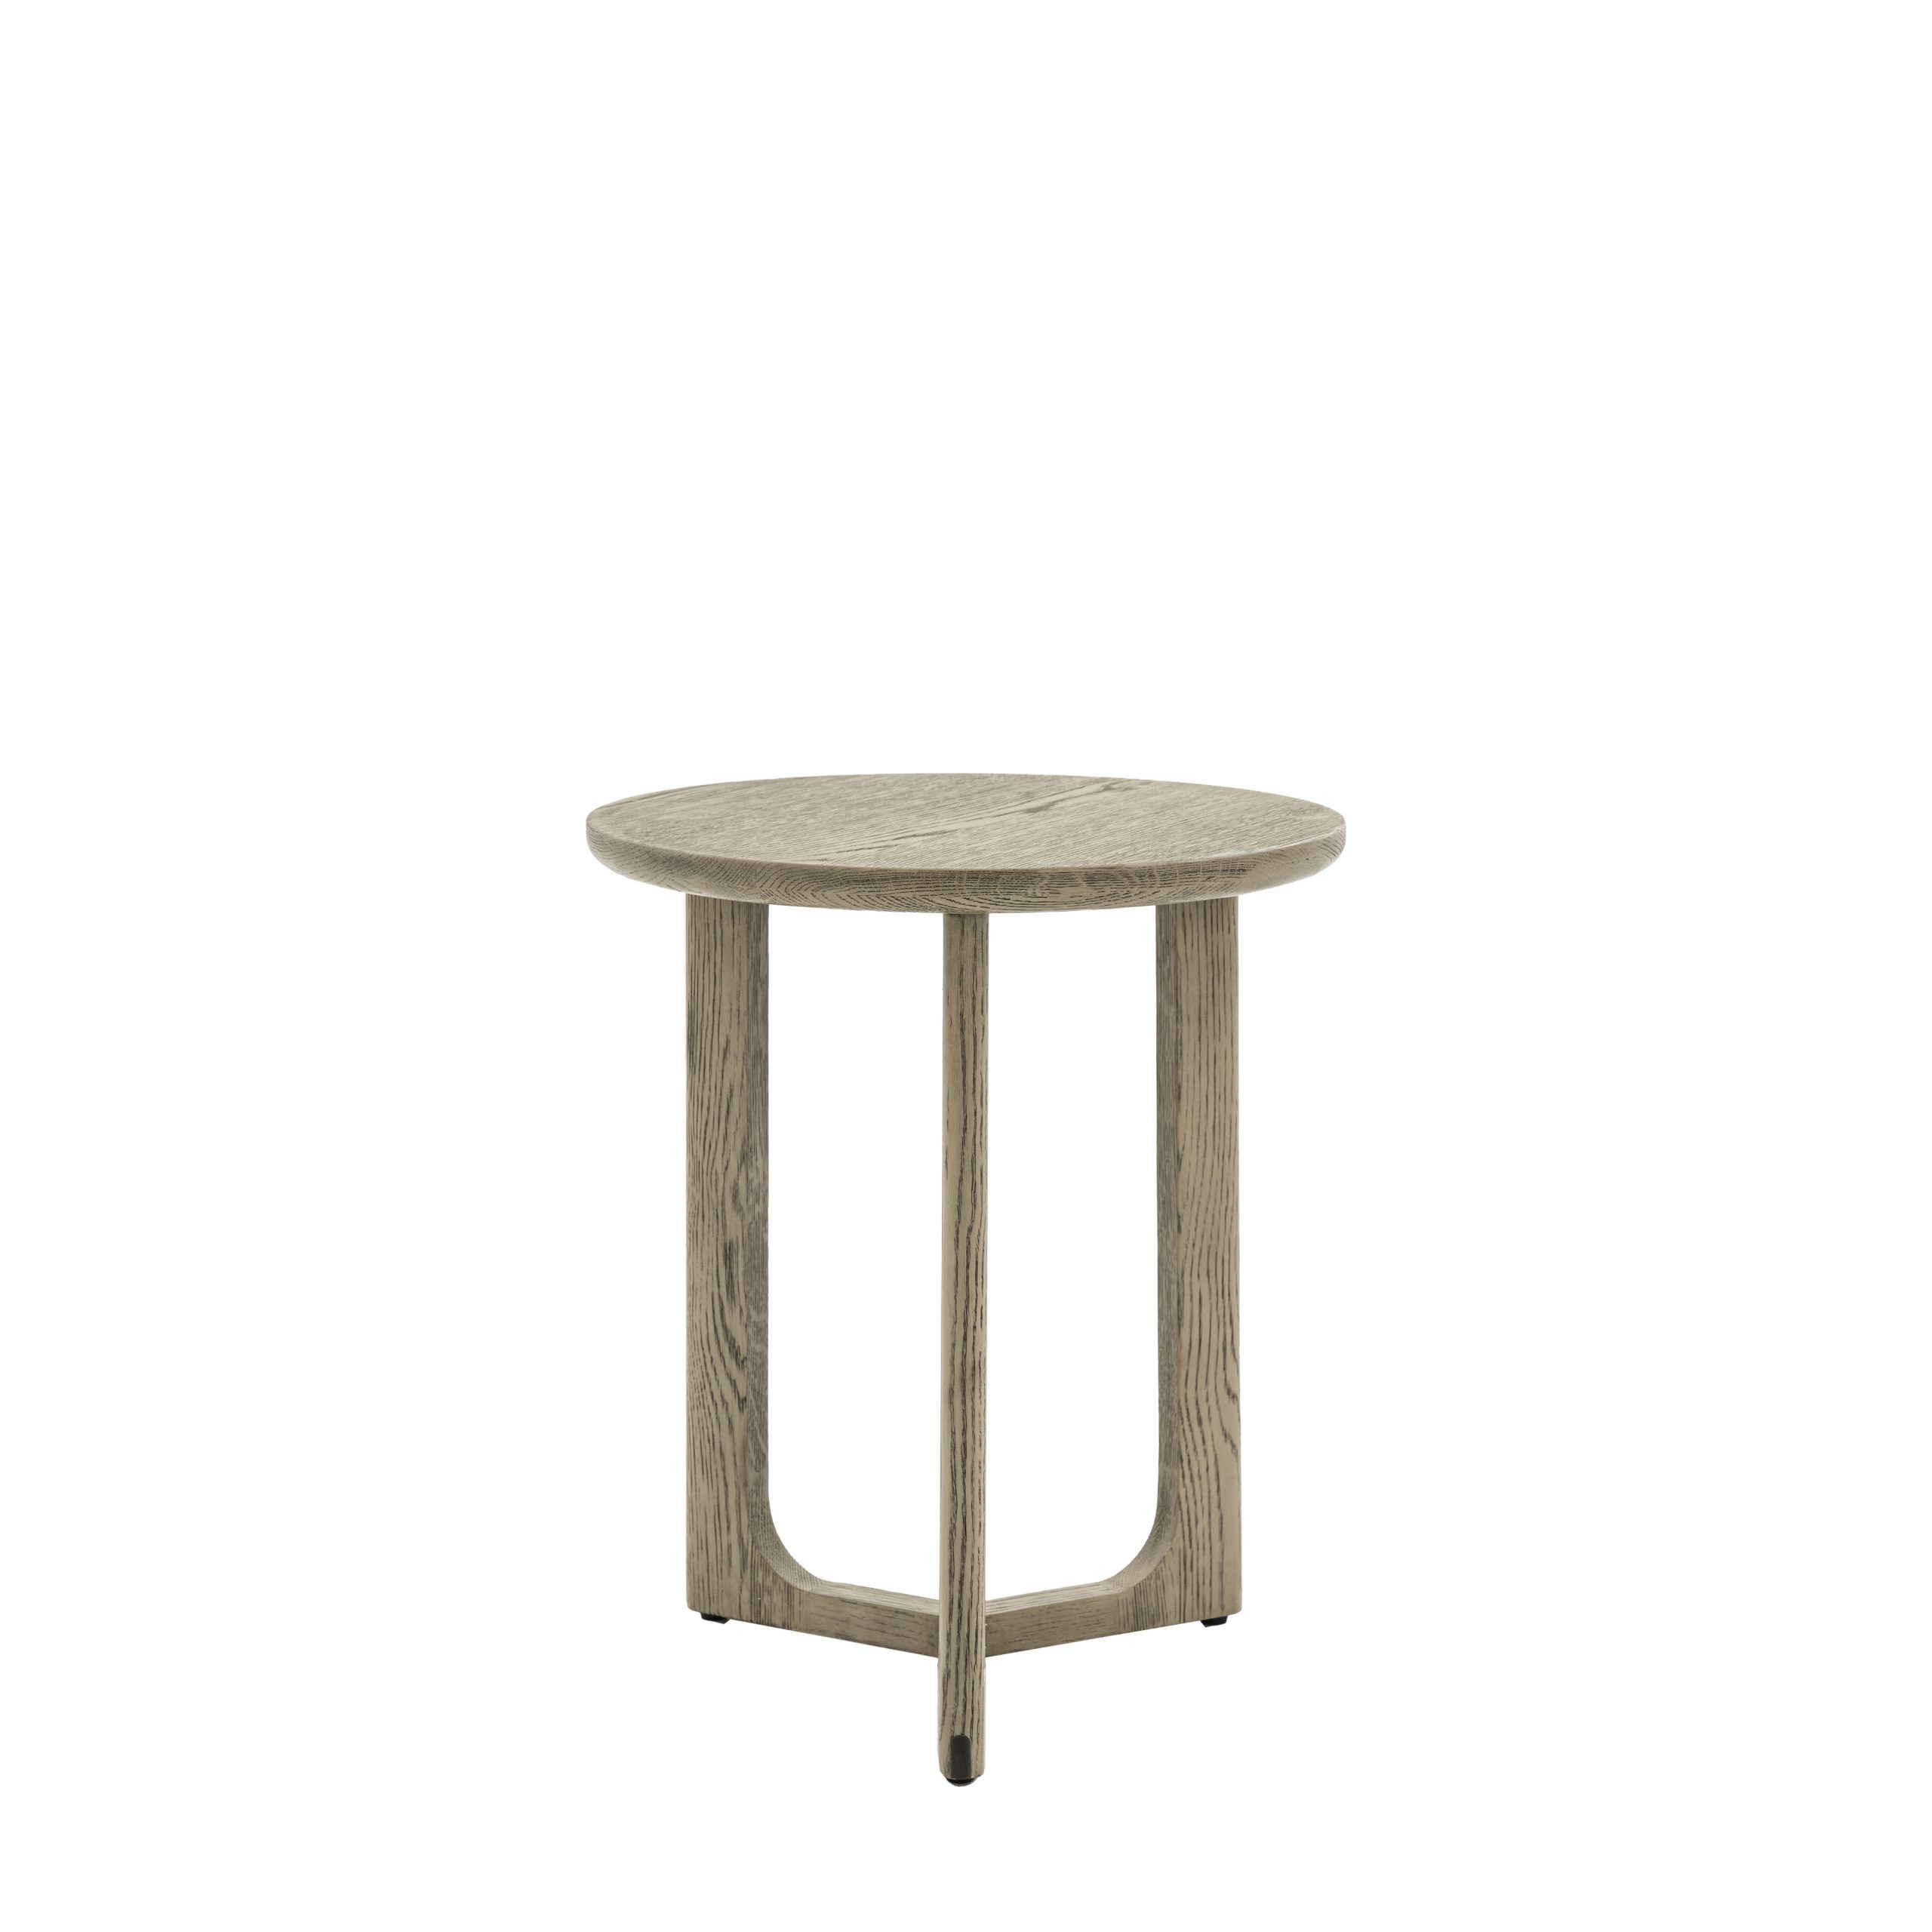 Gallery Direct Craft Side Table Smoked